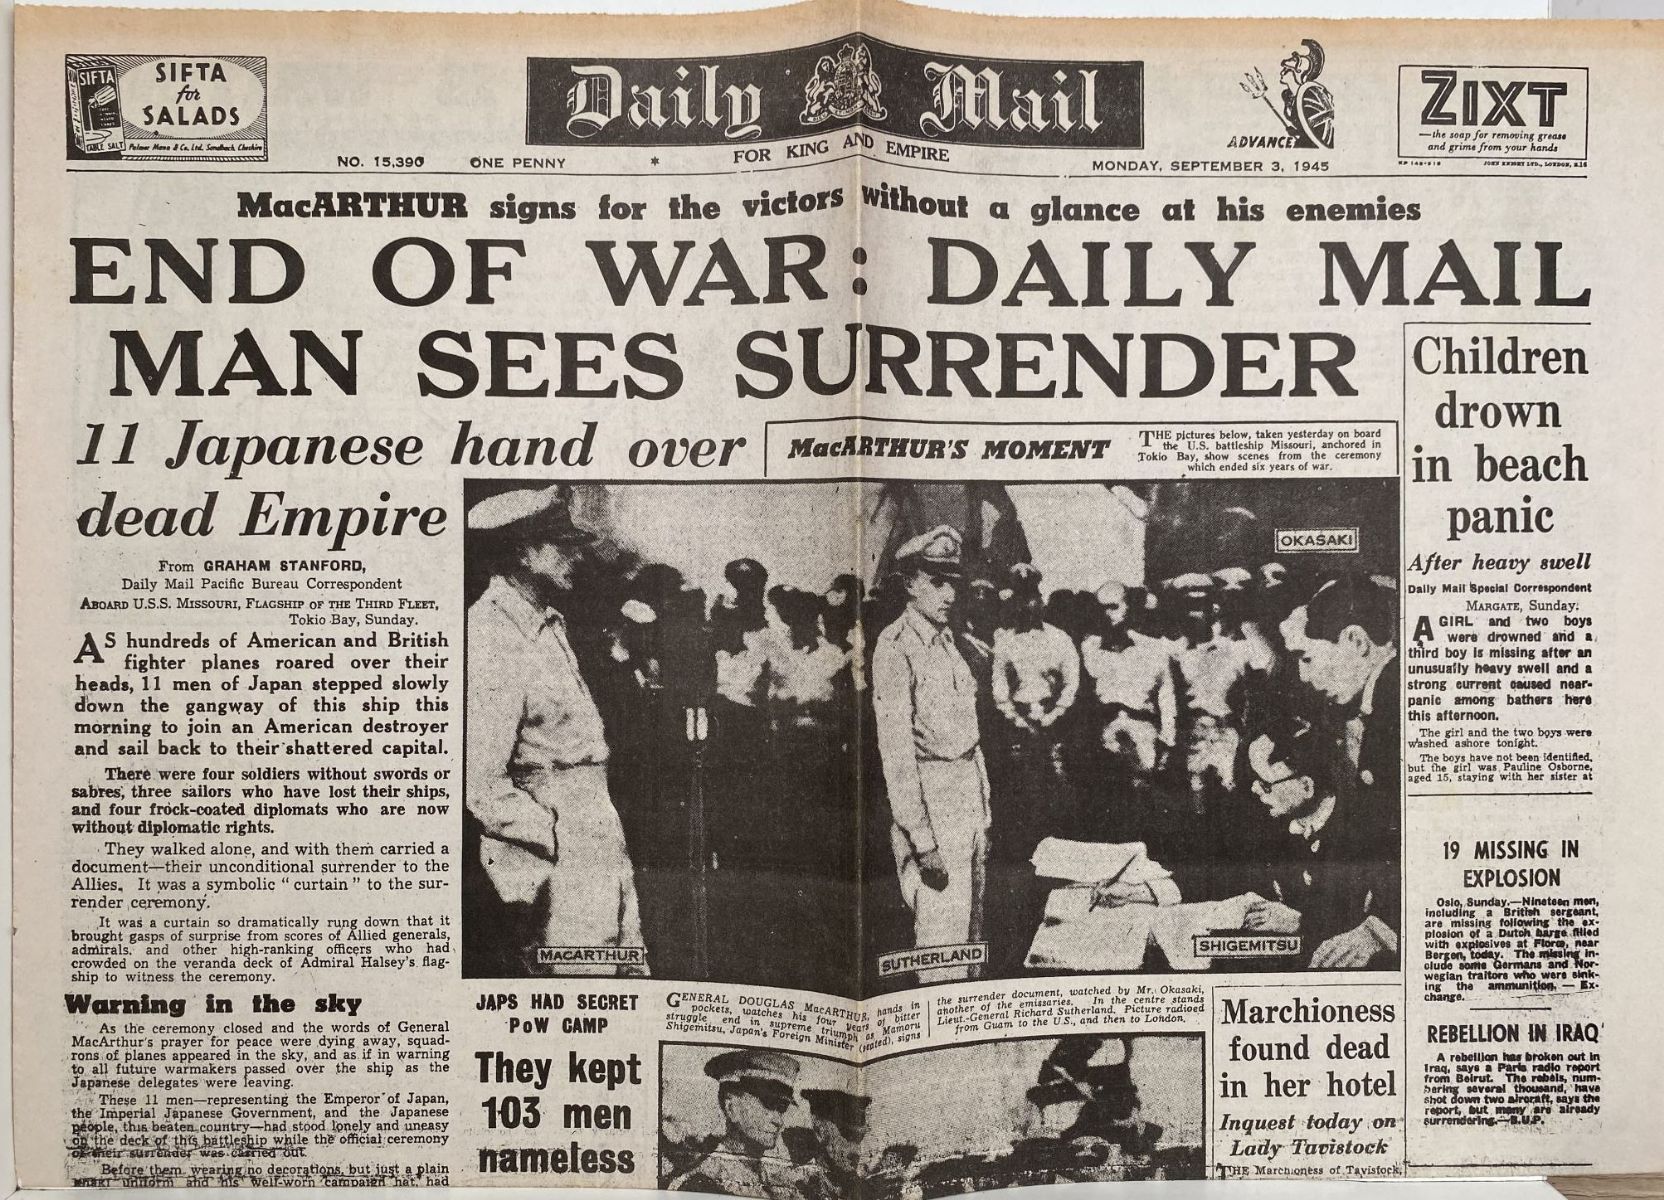 OLD WARTIME NEWSPAPER: Daily Mail, Monday 3rd September 1945